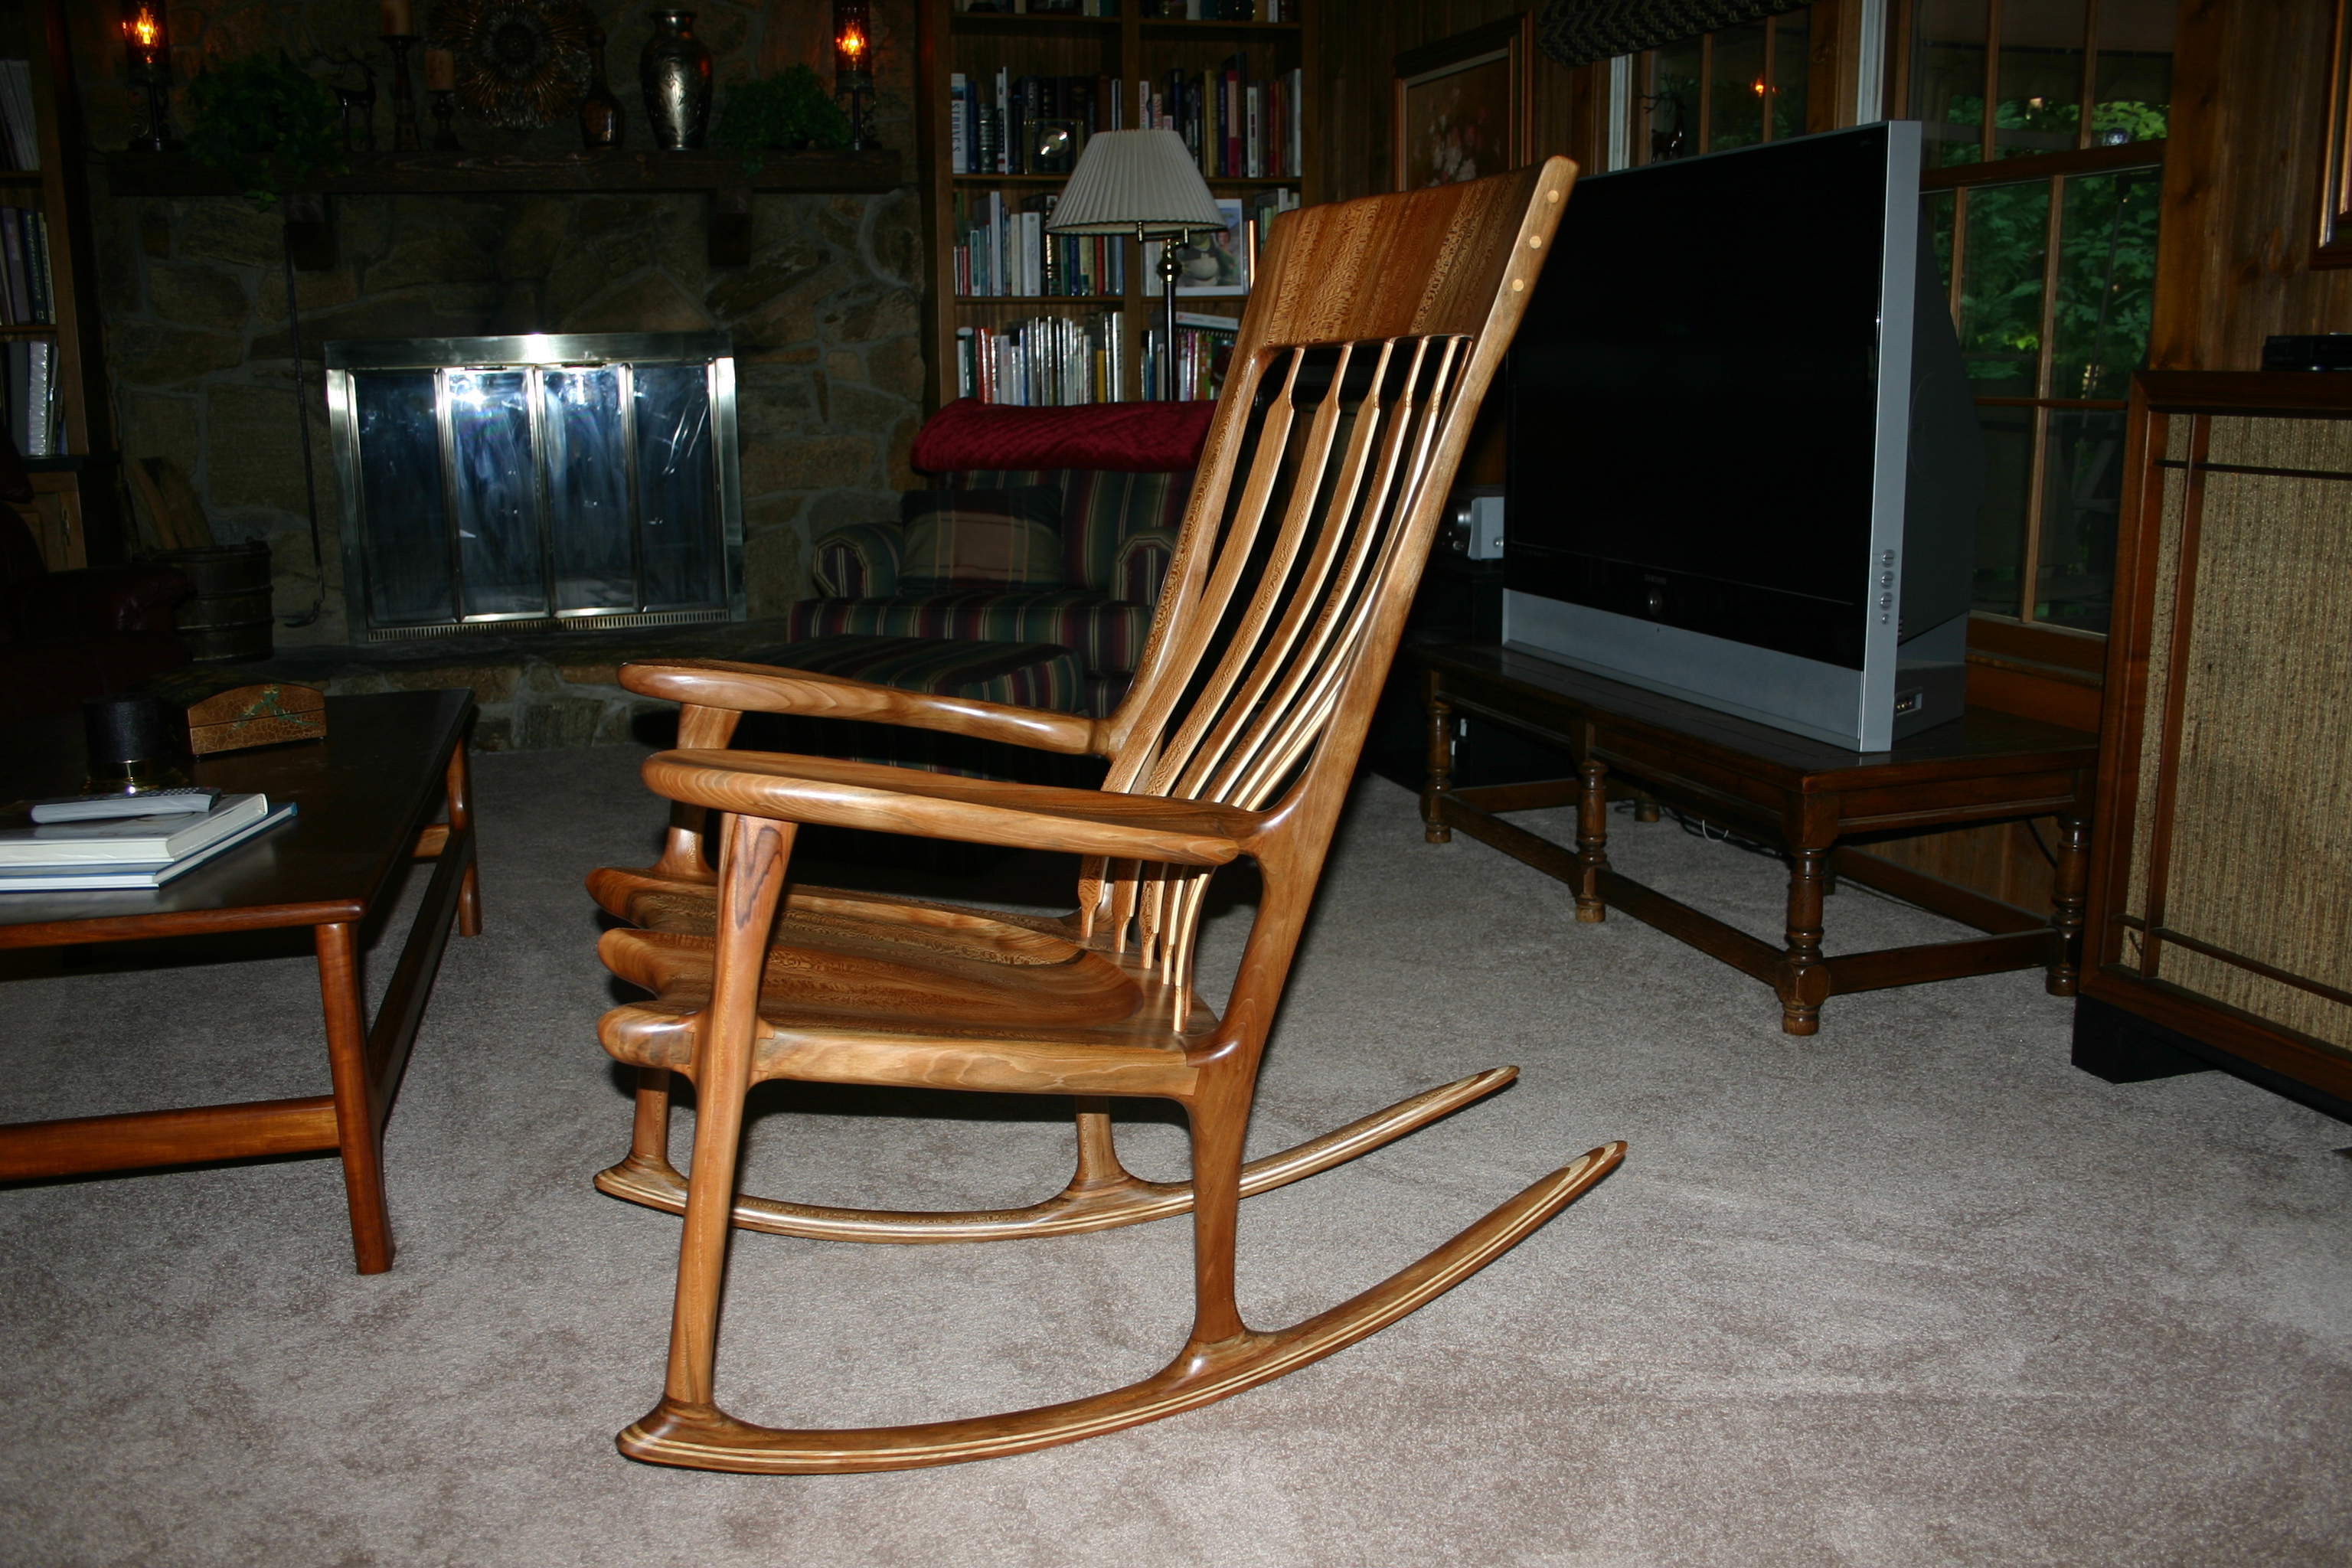 Quarter-sawn/spalted Sycamore-Maloof style rocker